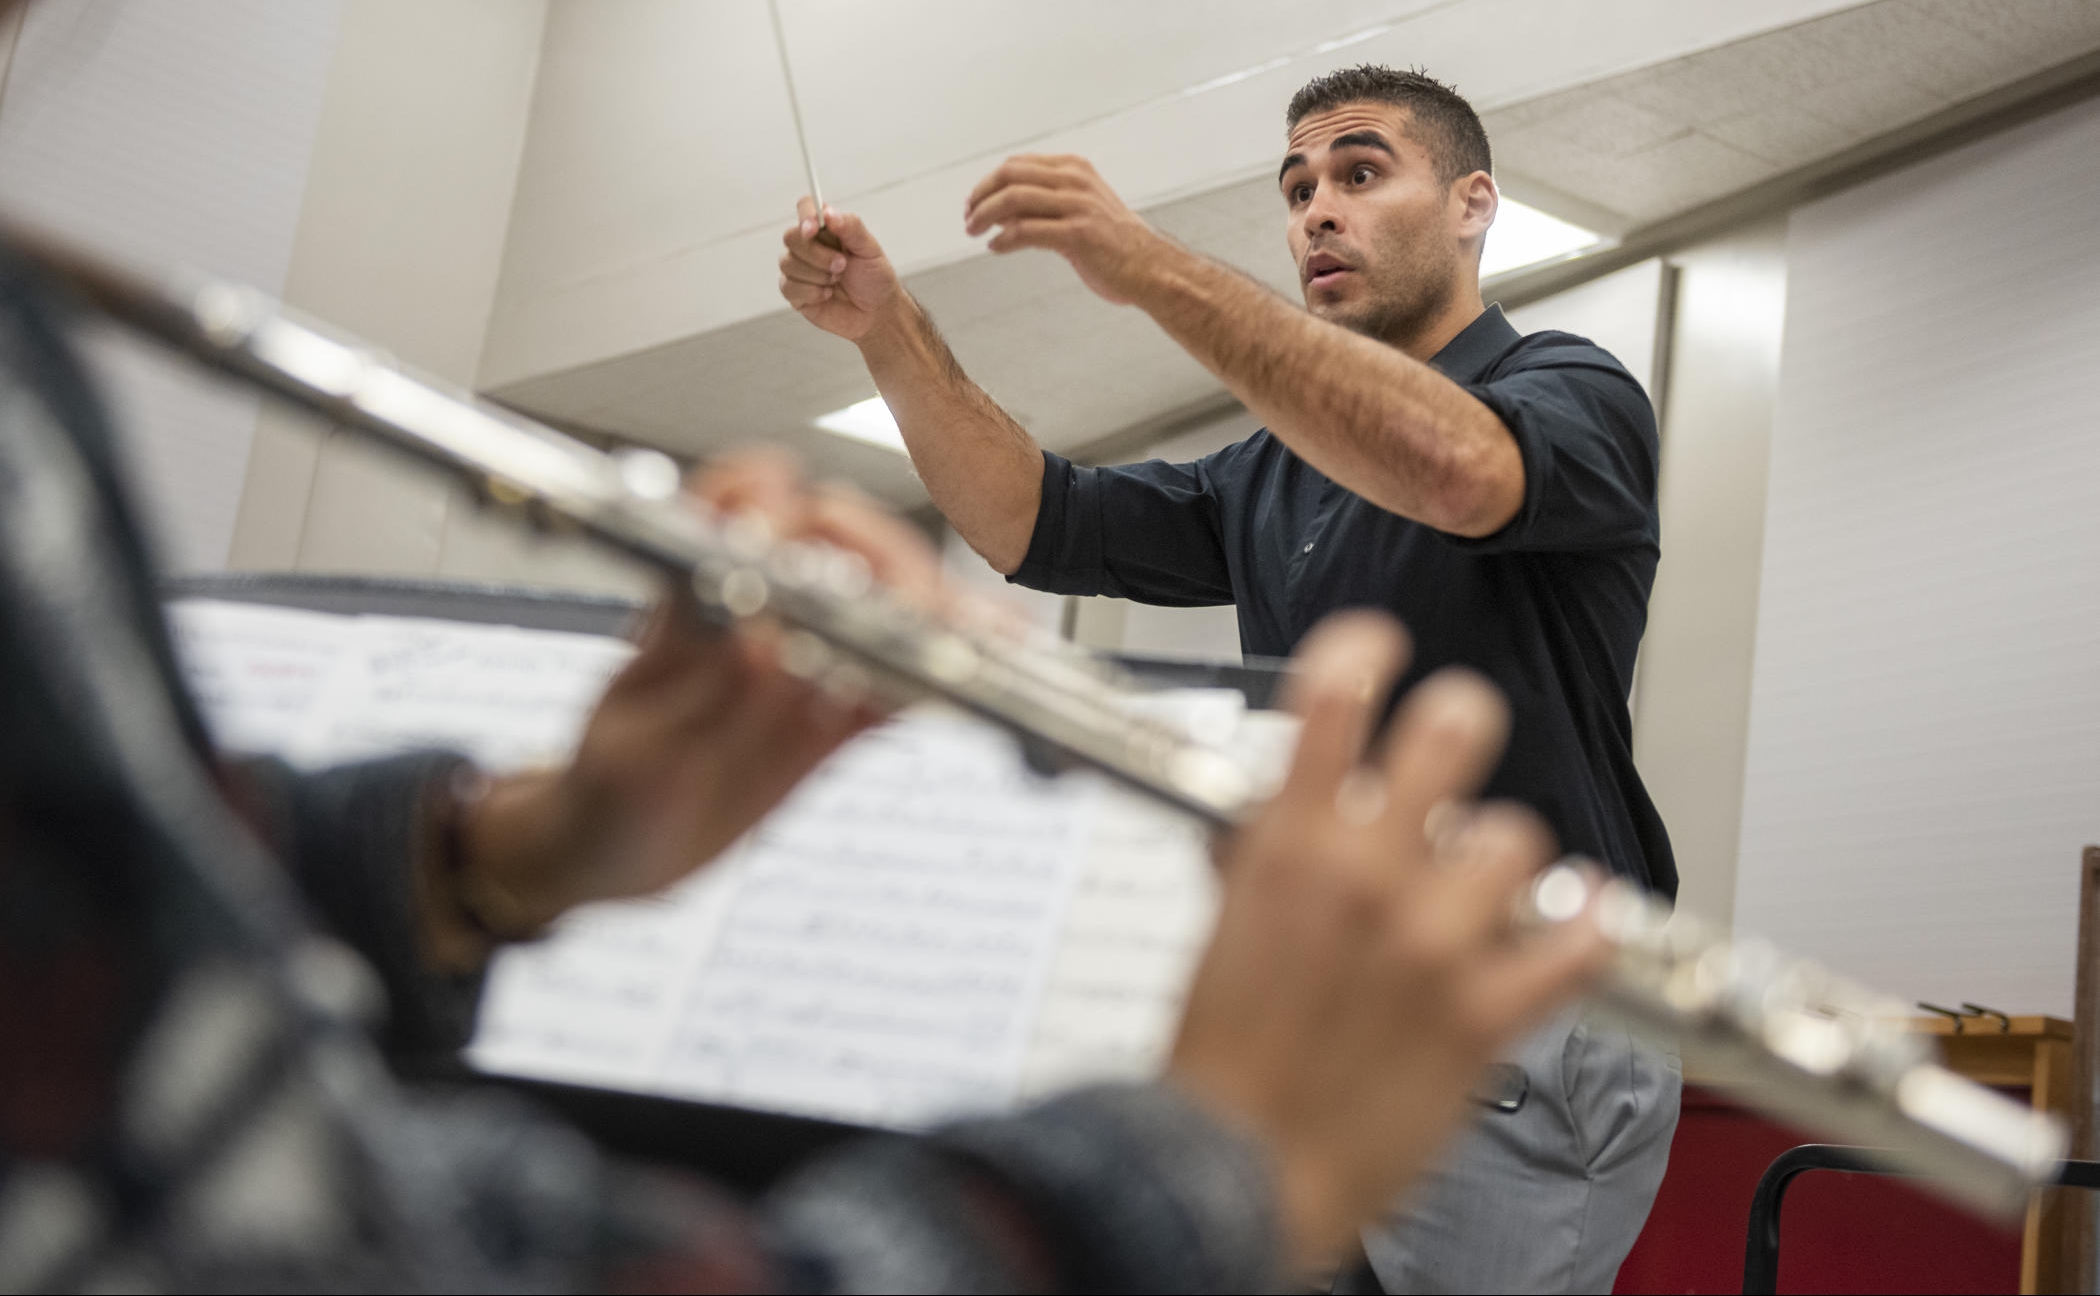 Chris Navarrete conducts a music rehearsal with a clarinet player playing in the foreground